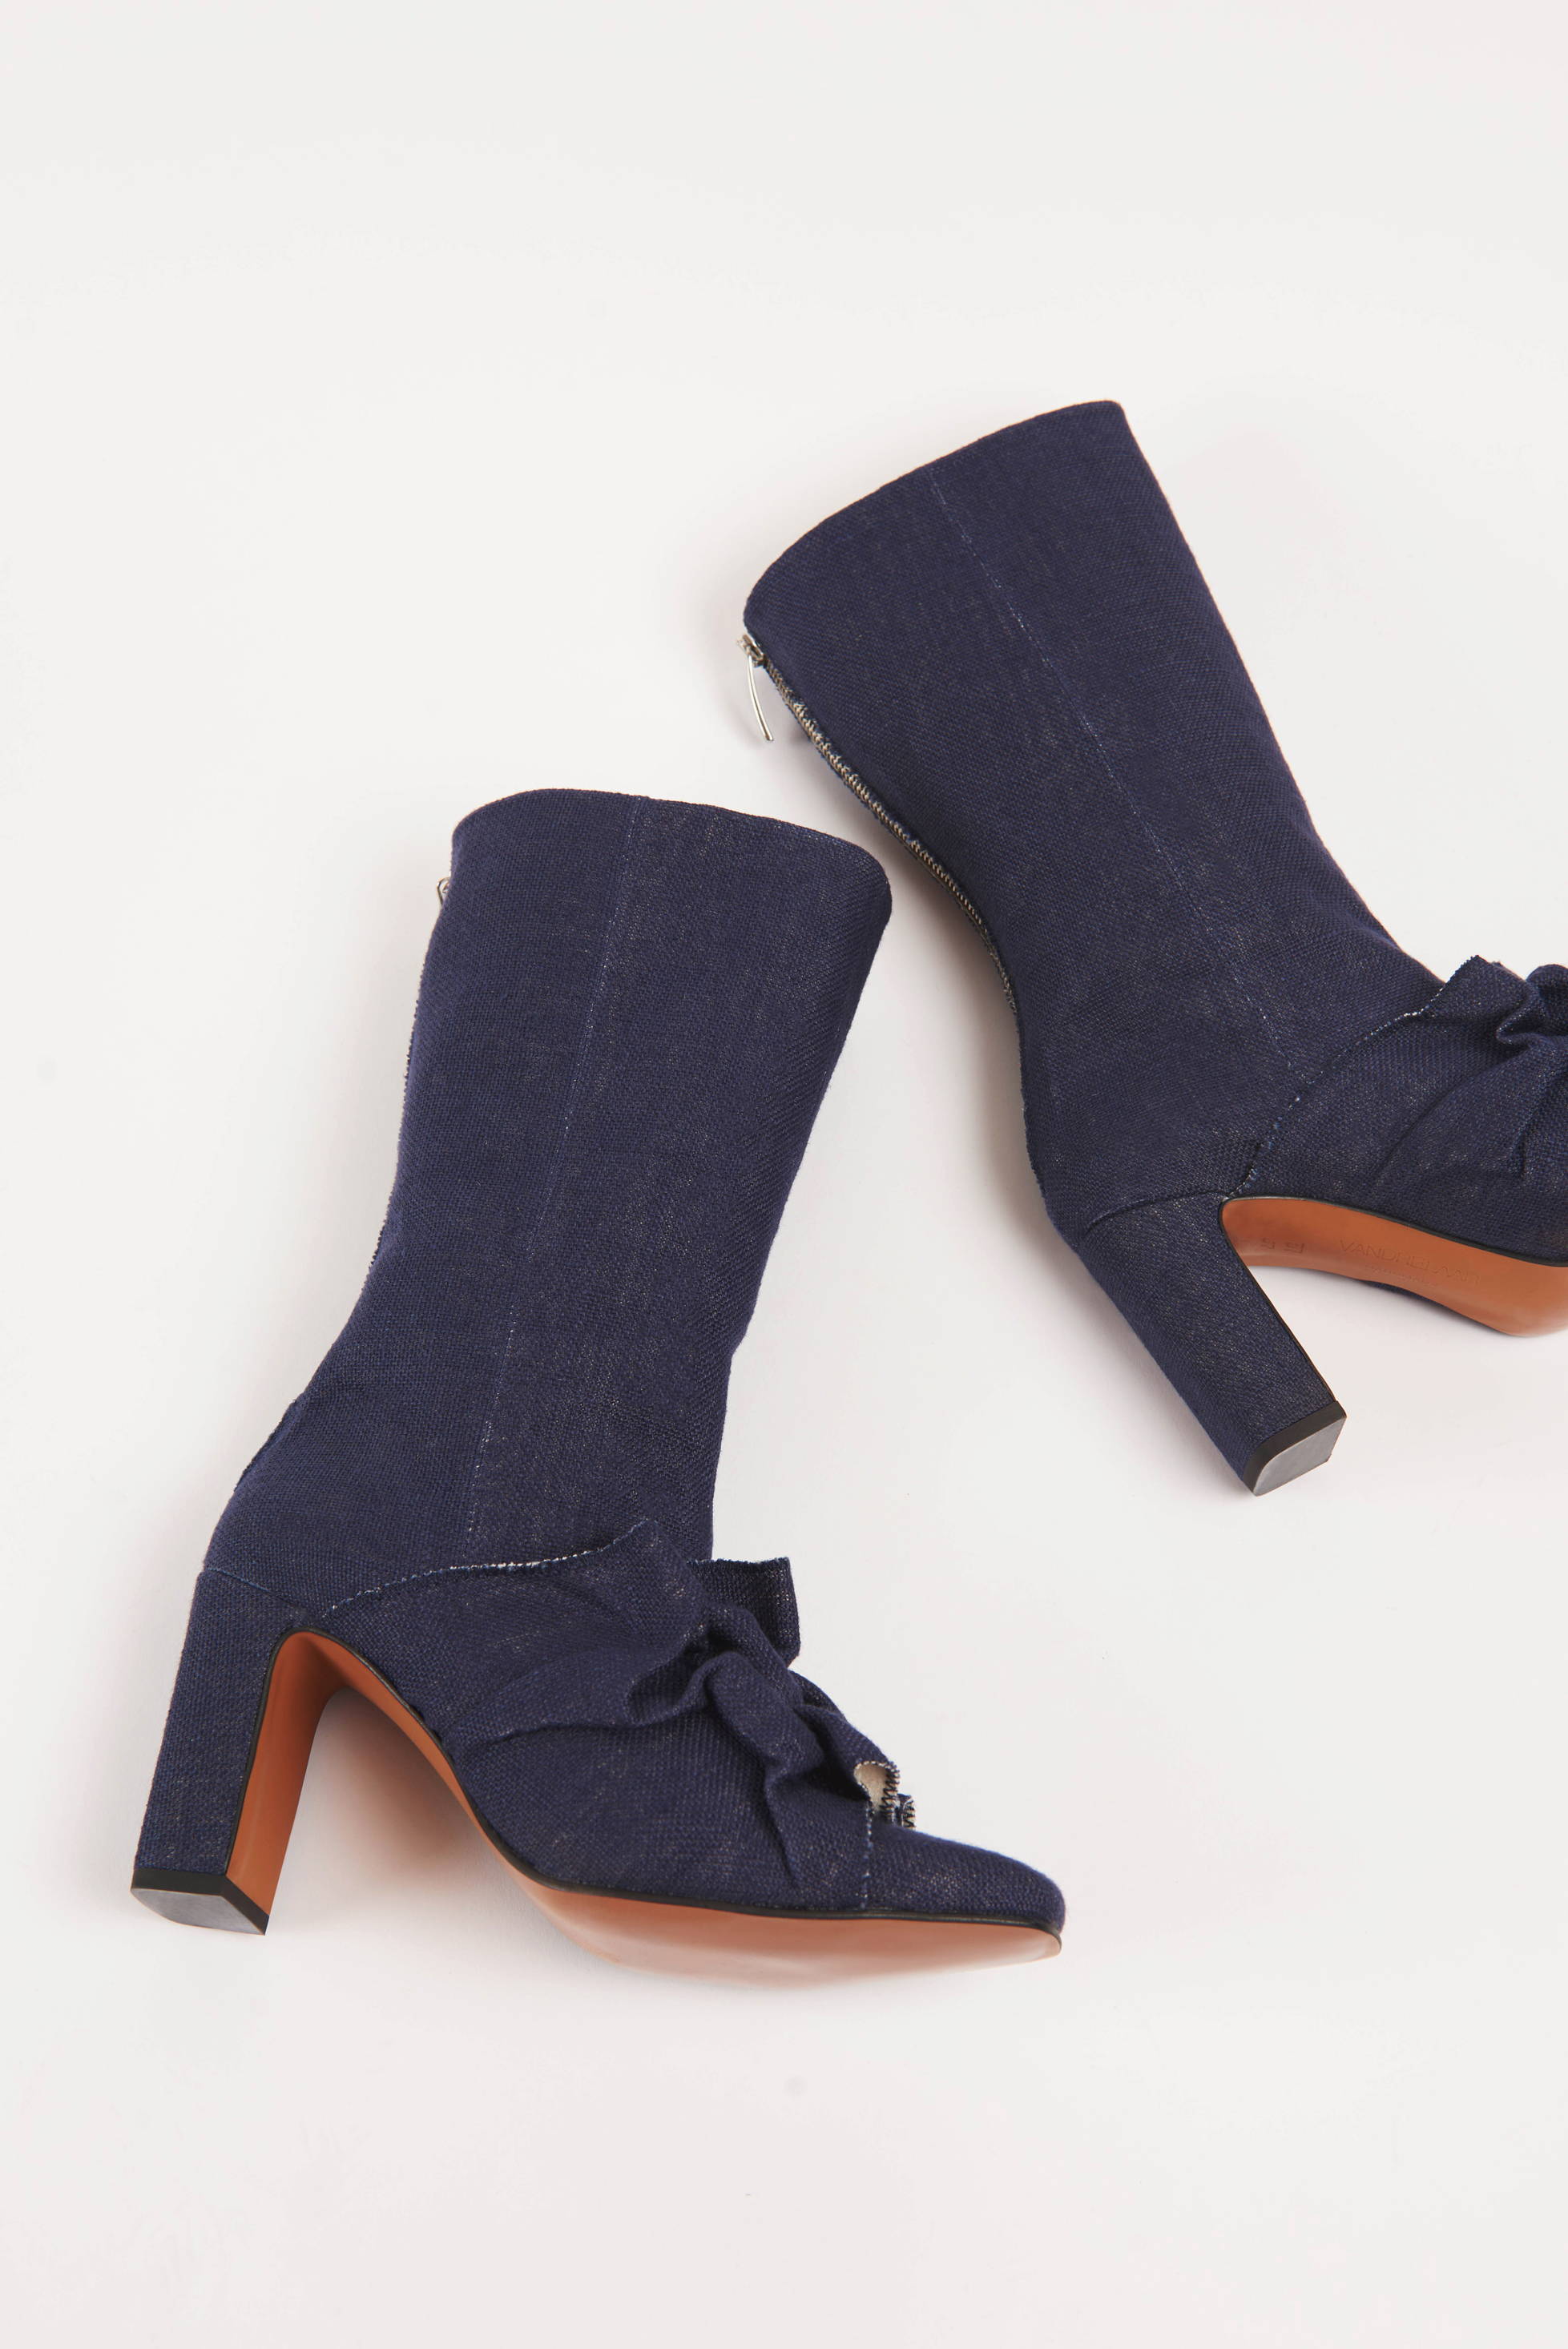 Pair of Vandrelaar Greta navy linen high-heel ankle boots, made from sustainable vegan materials and featuring brown sole